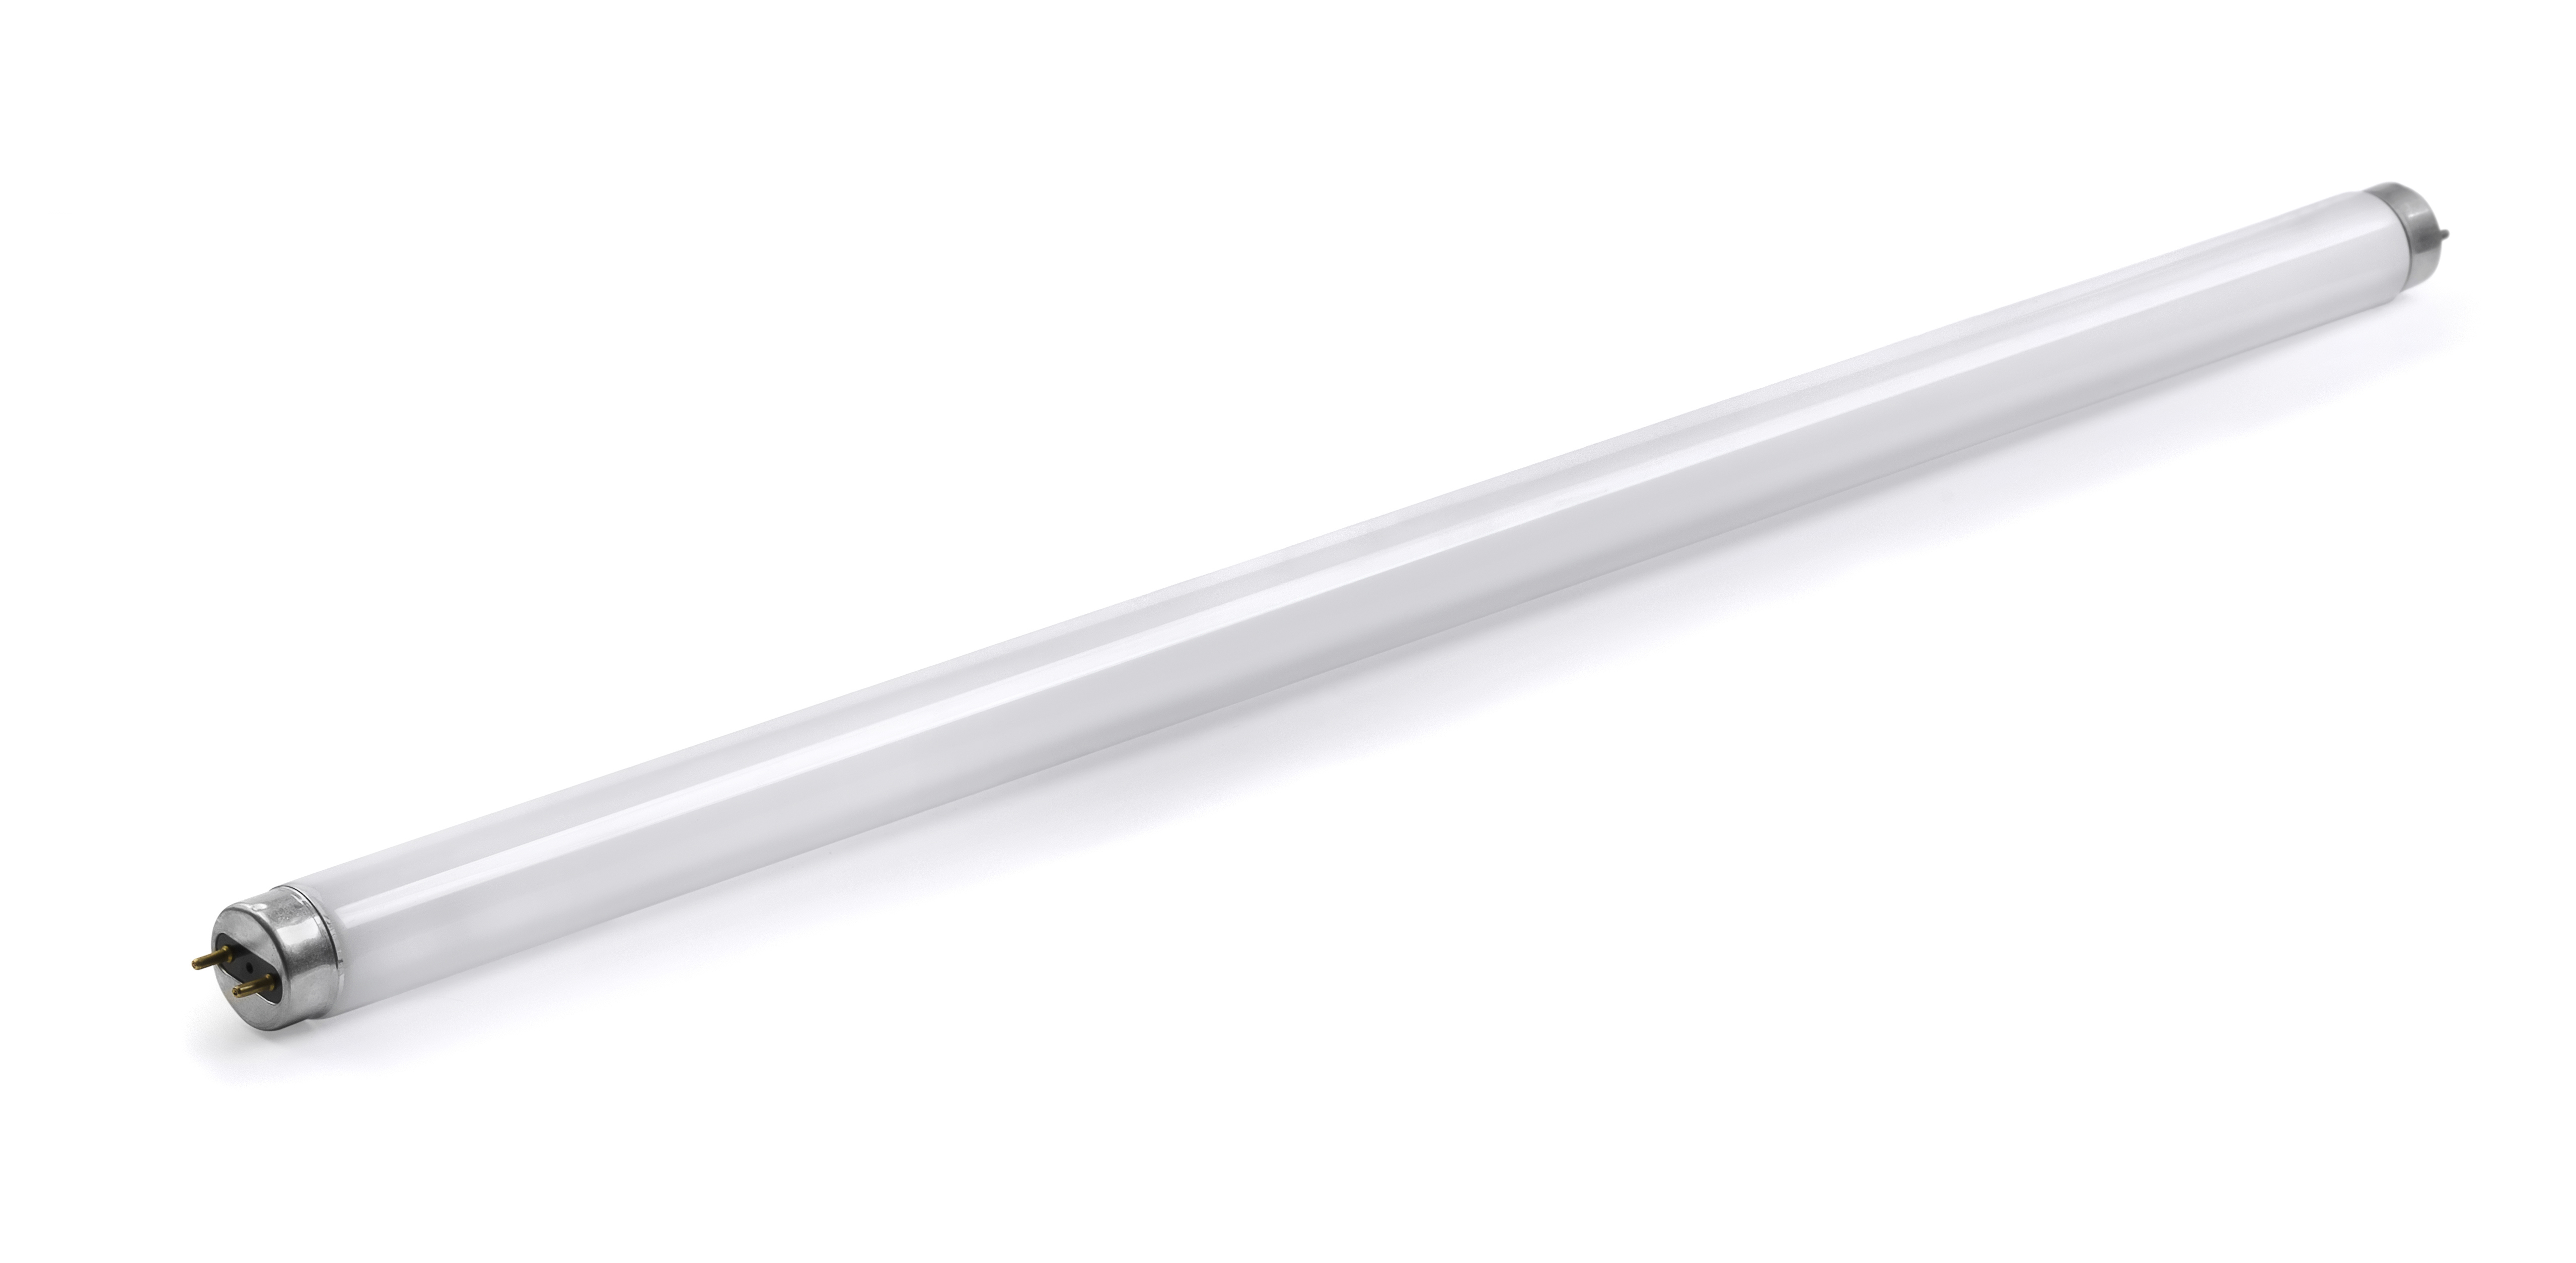 Fluorescent Tube Light Fluorescent Tube Light Bulbs 8 Fluorescent with regard to size 5117 X 2508